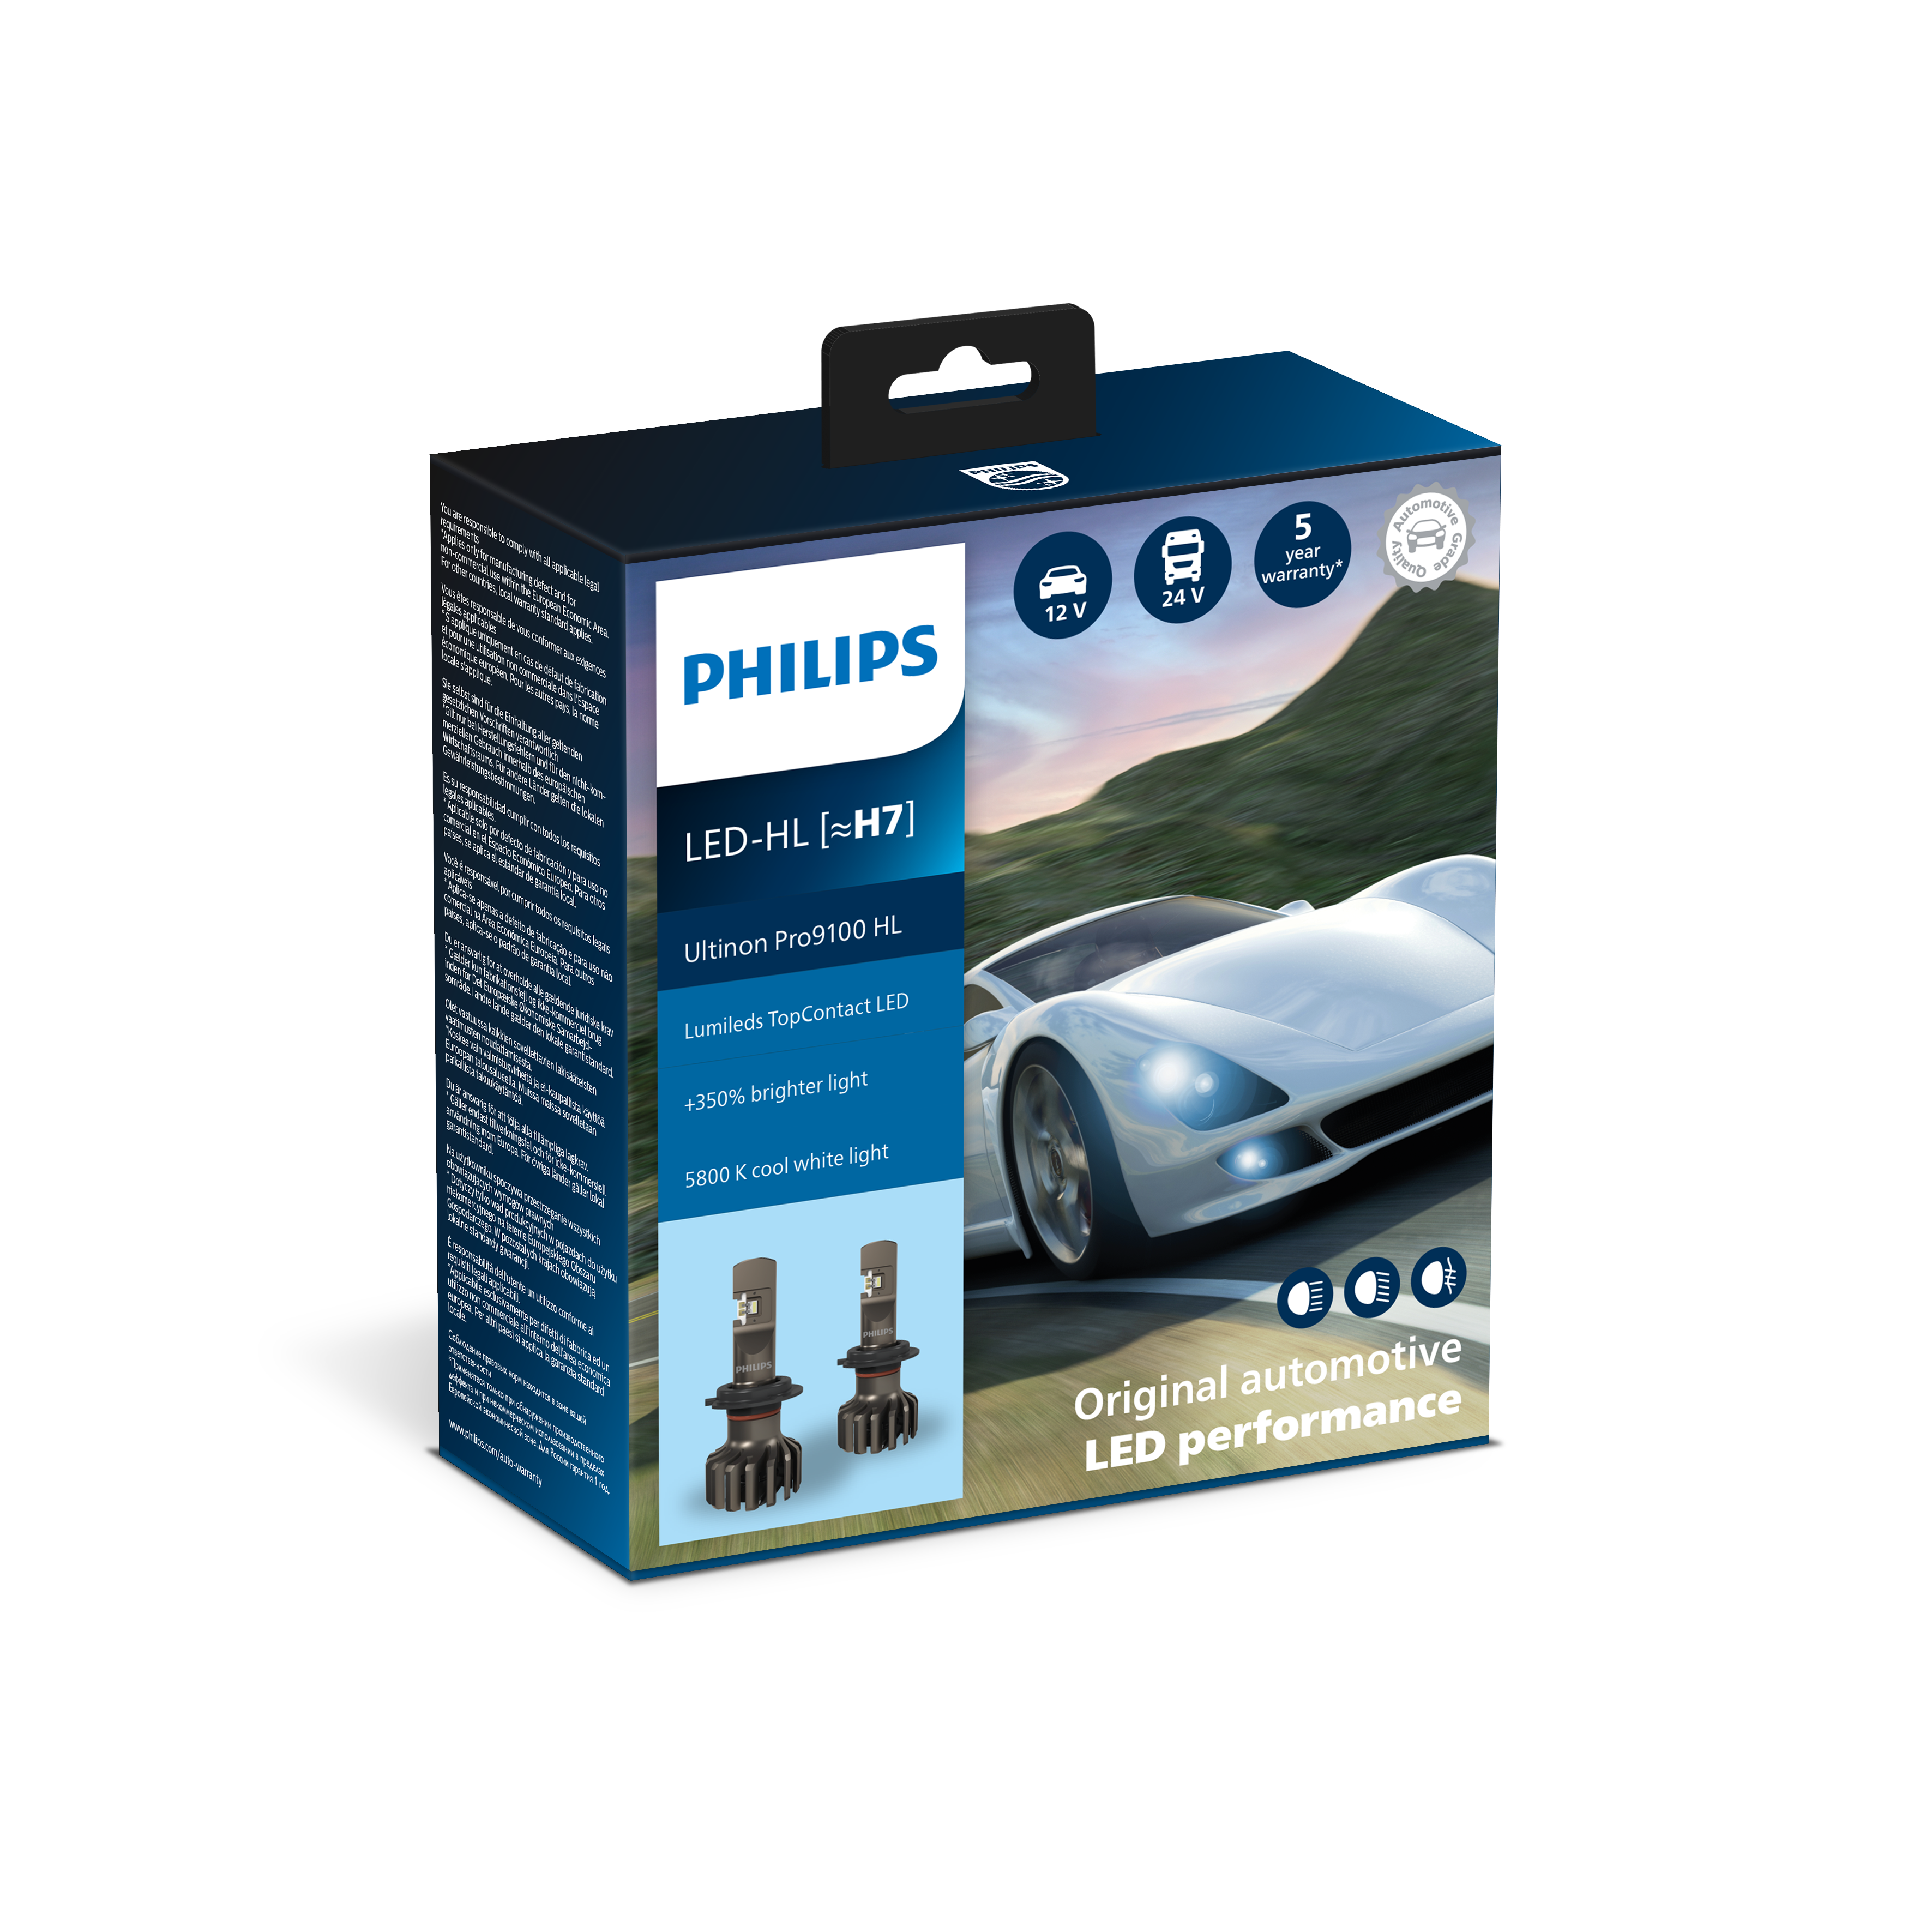 New Philips Ultinon Pro9100 Headlight Bulbs Bring Class-leading Innovation  and 350% More Brightness